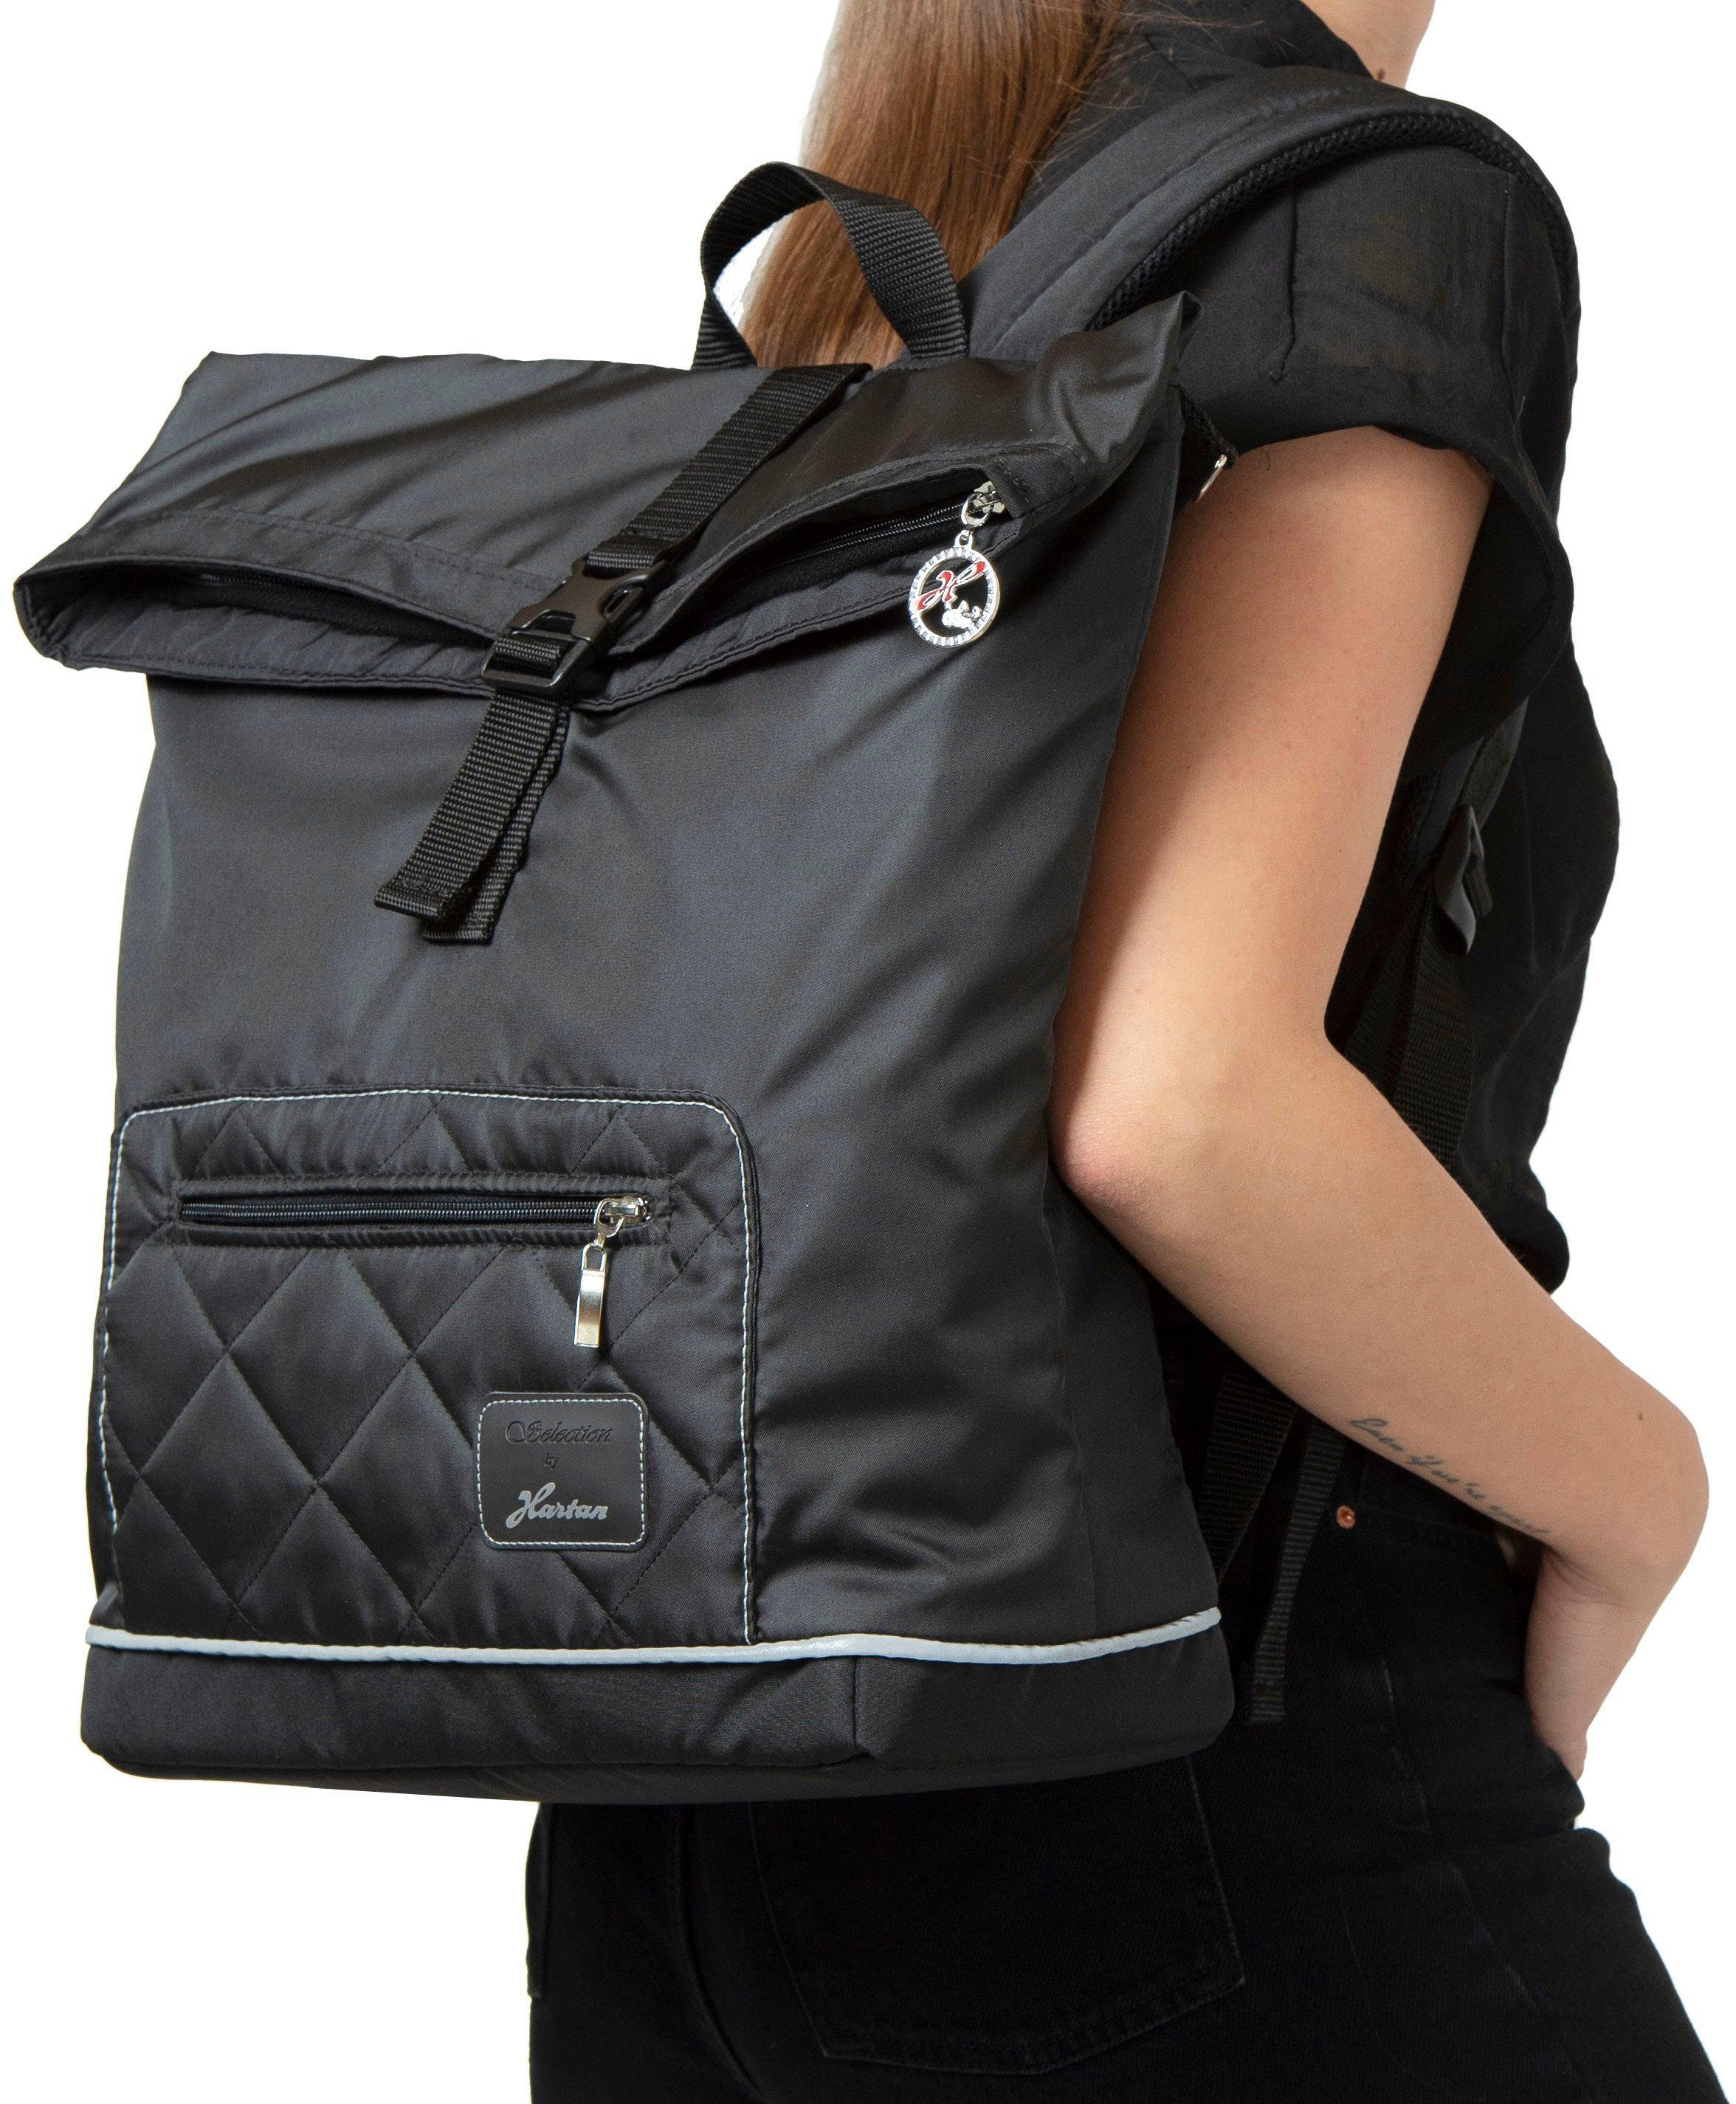 pinstripe Space Germany - Hartan Collection, Made Wickelrucksack Thermofach; in Casual bag mit black